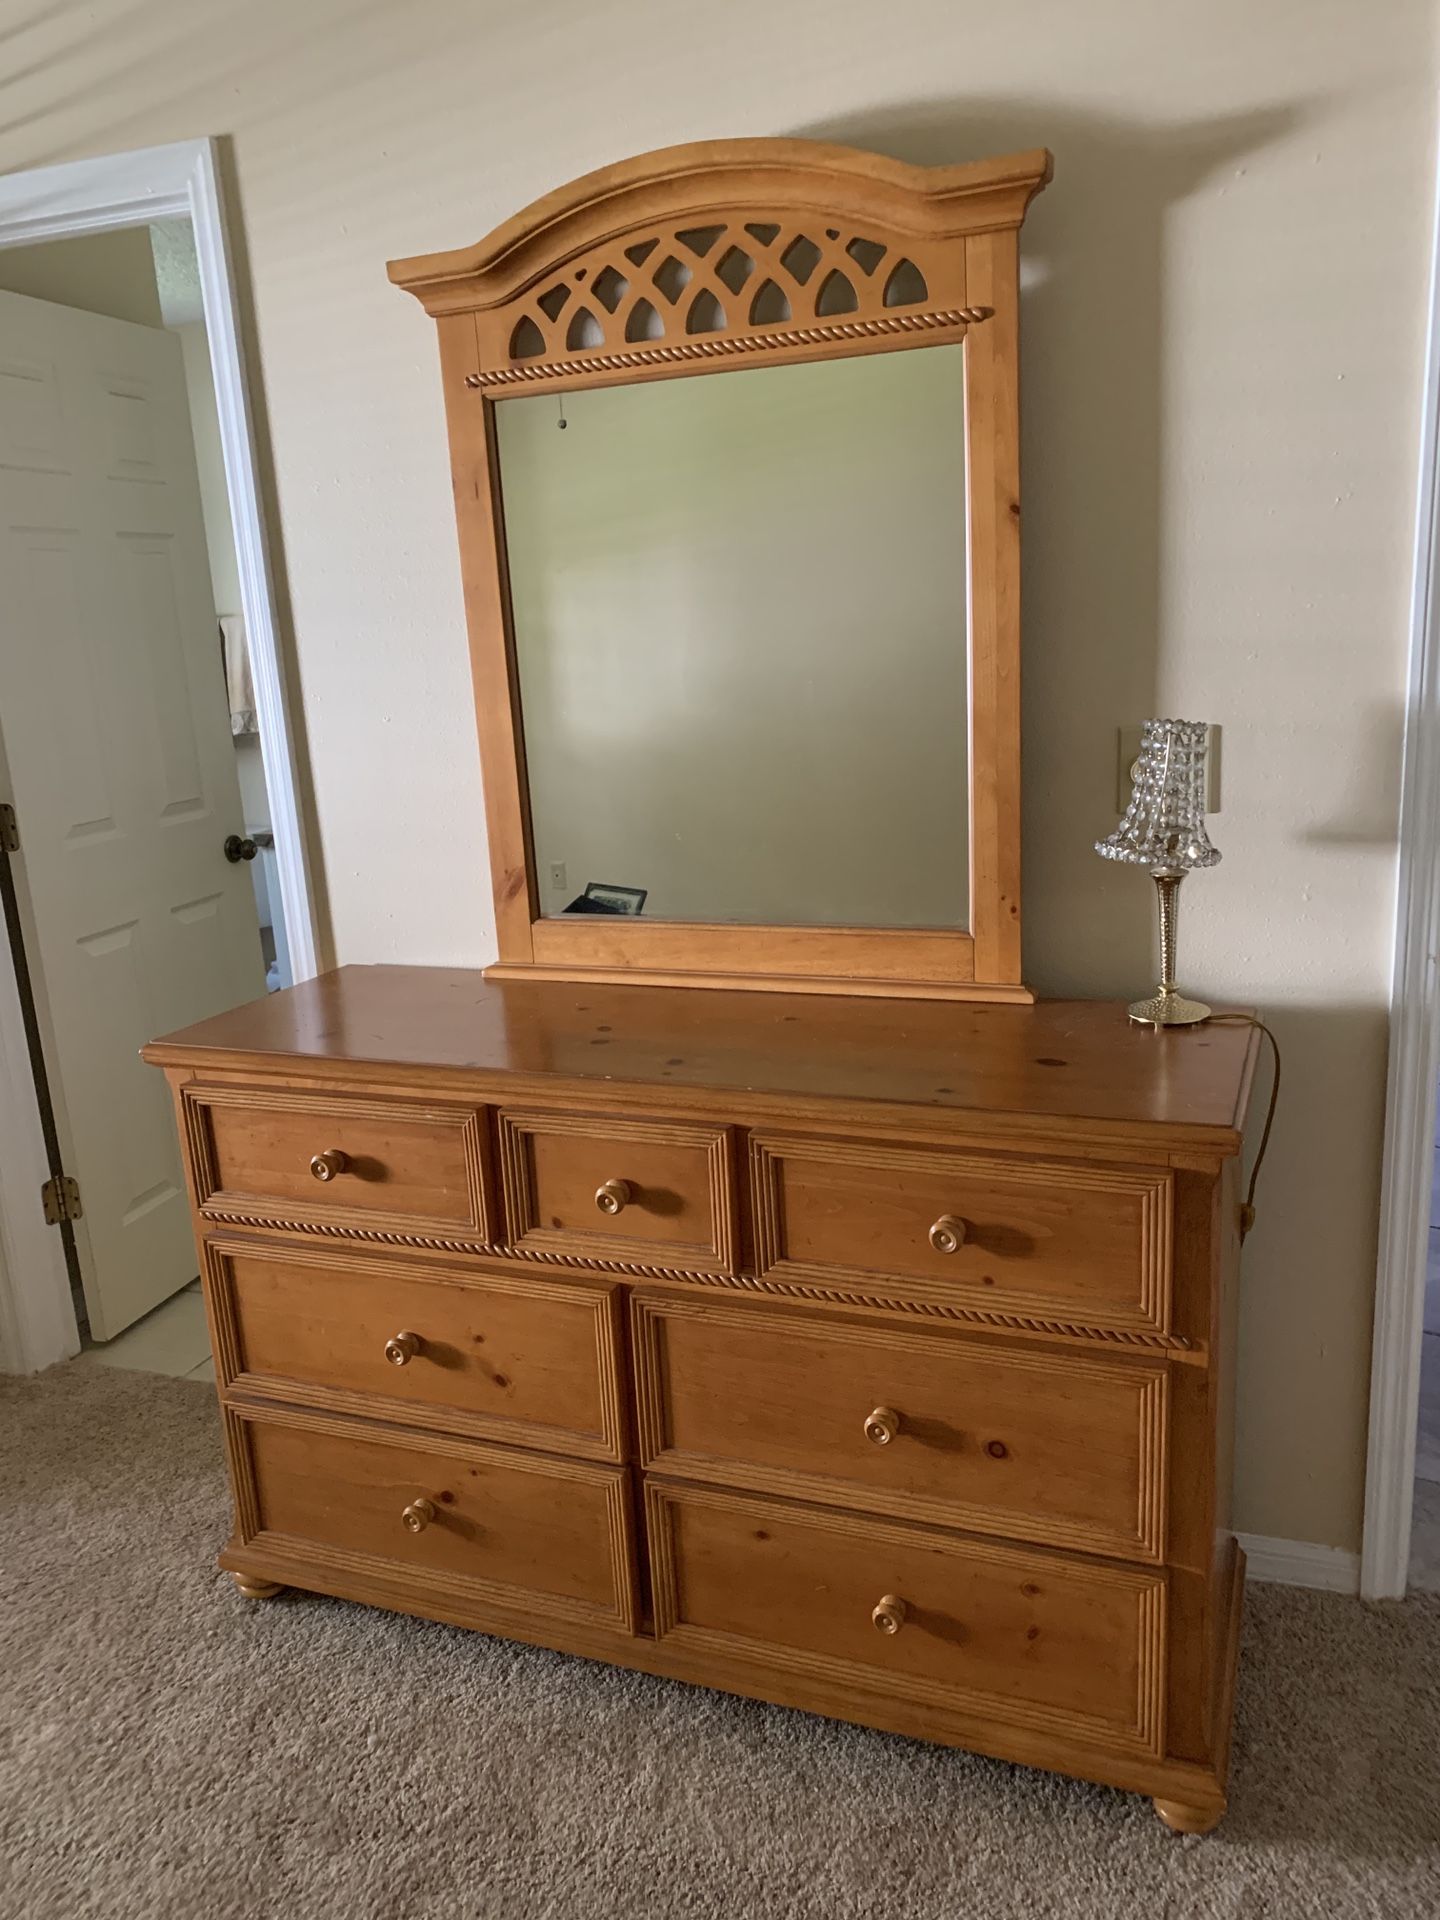 Dresser with mirror , desk and chair